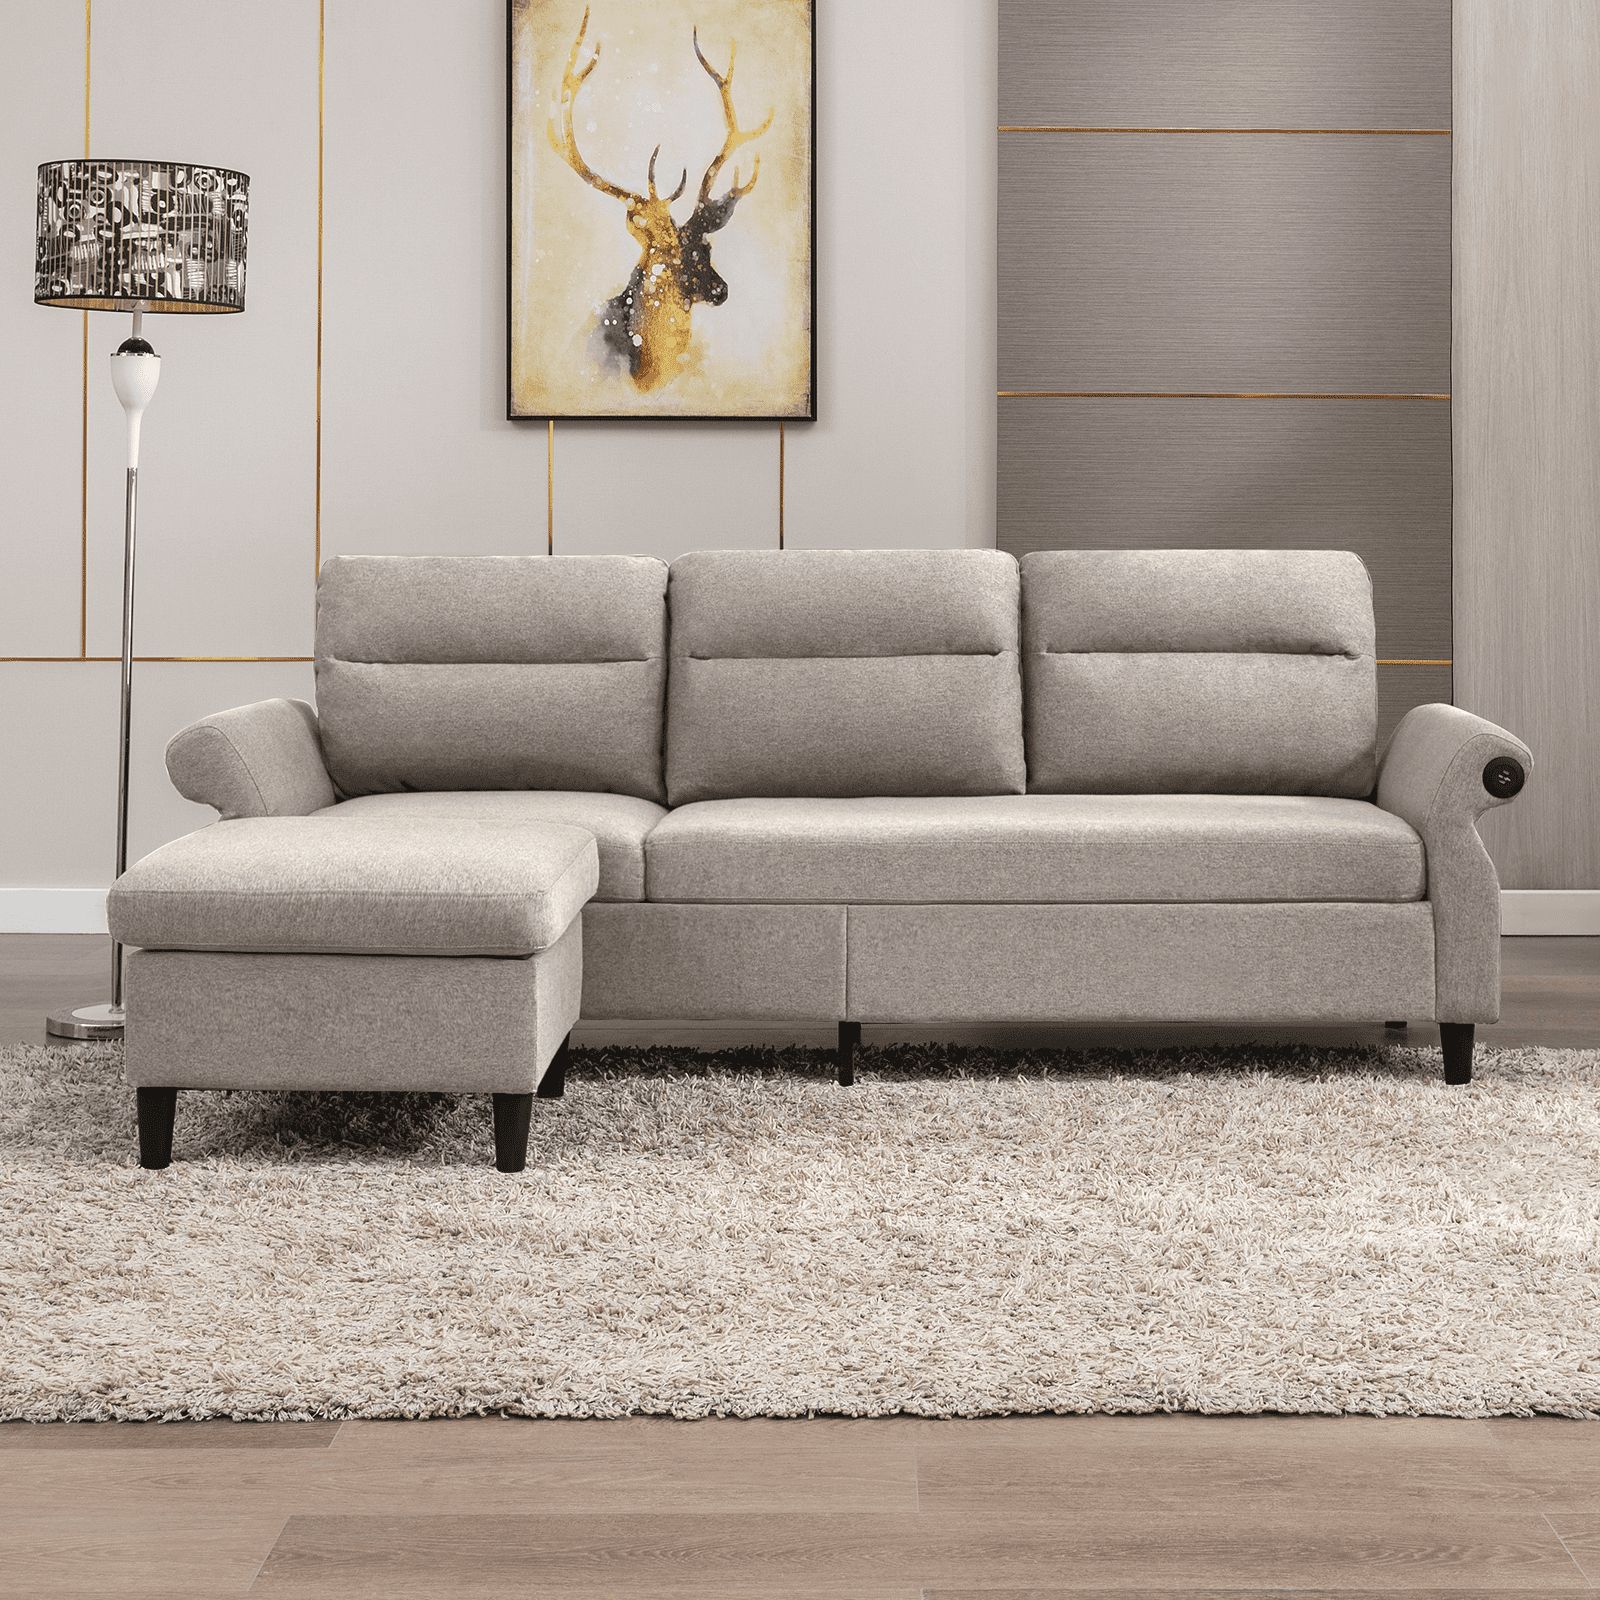 Mjkone Modern 88" W Convertible Sectional Sofa Couch With 2 Usb Ports And  Adjustable Armres,3 Seat L Shape Sofa Couch With,ottoman For Living  Room,apartment , Linen Fabric,light Grey – Walmart For 3 Seat L Shape Sofa Couches With 2 Usb Ports (Gallery 1 of 20)